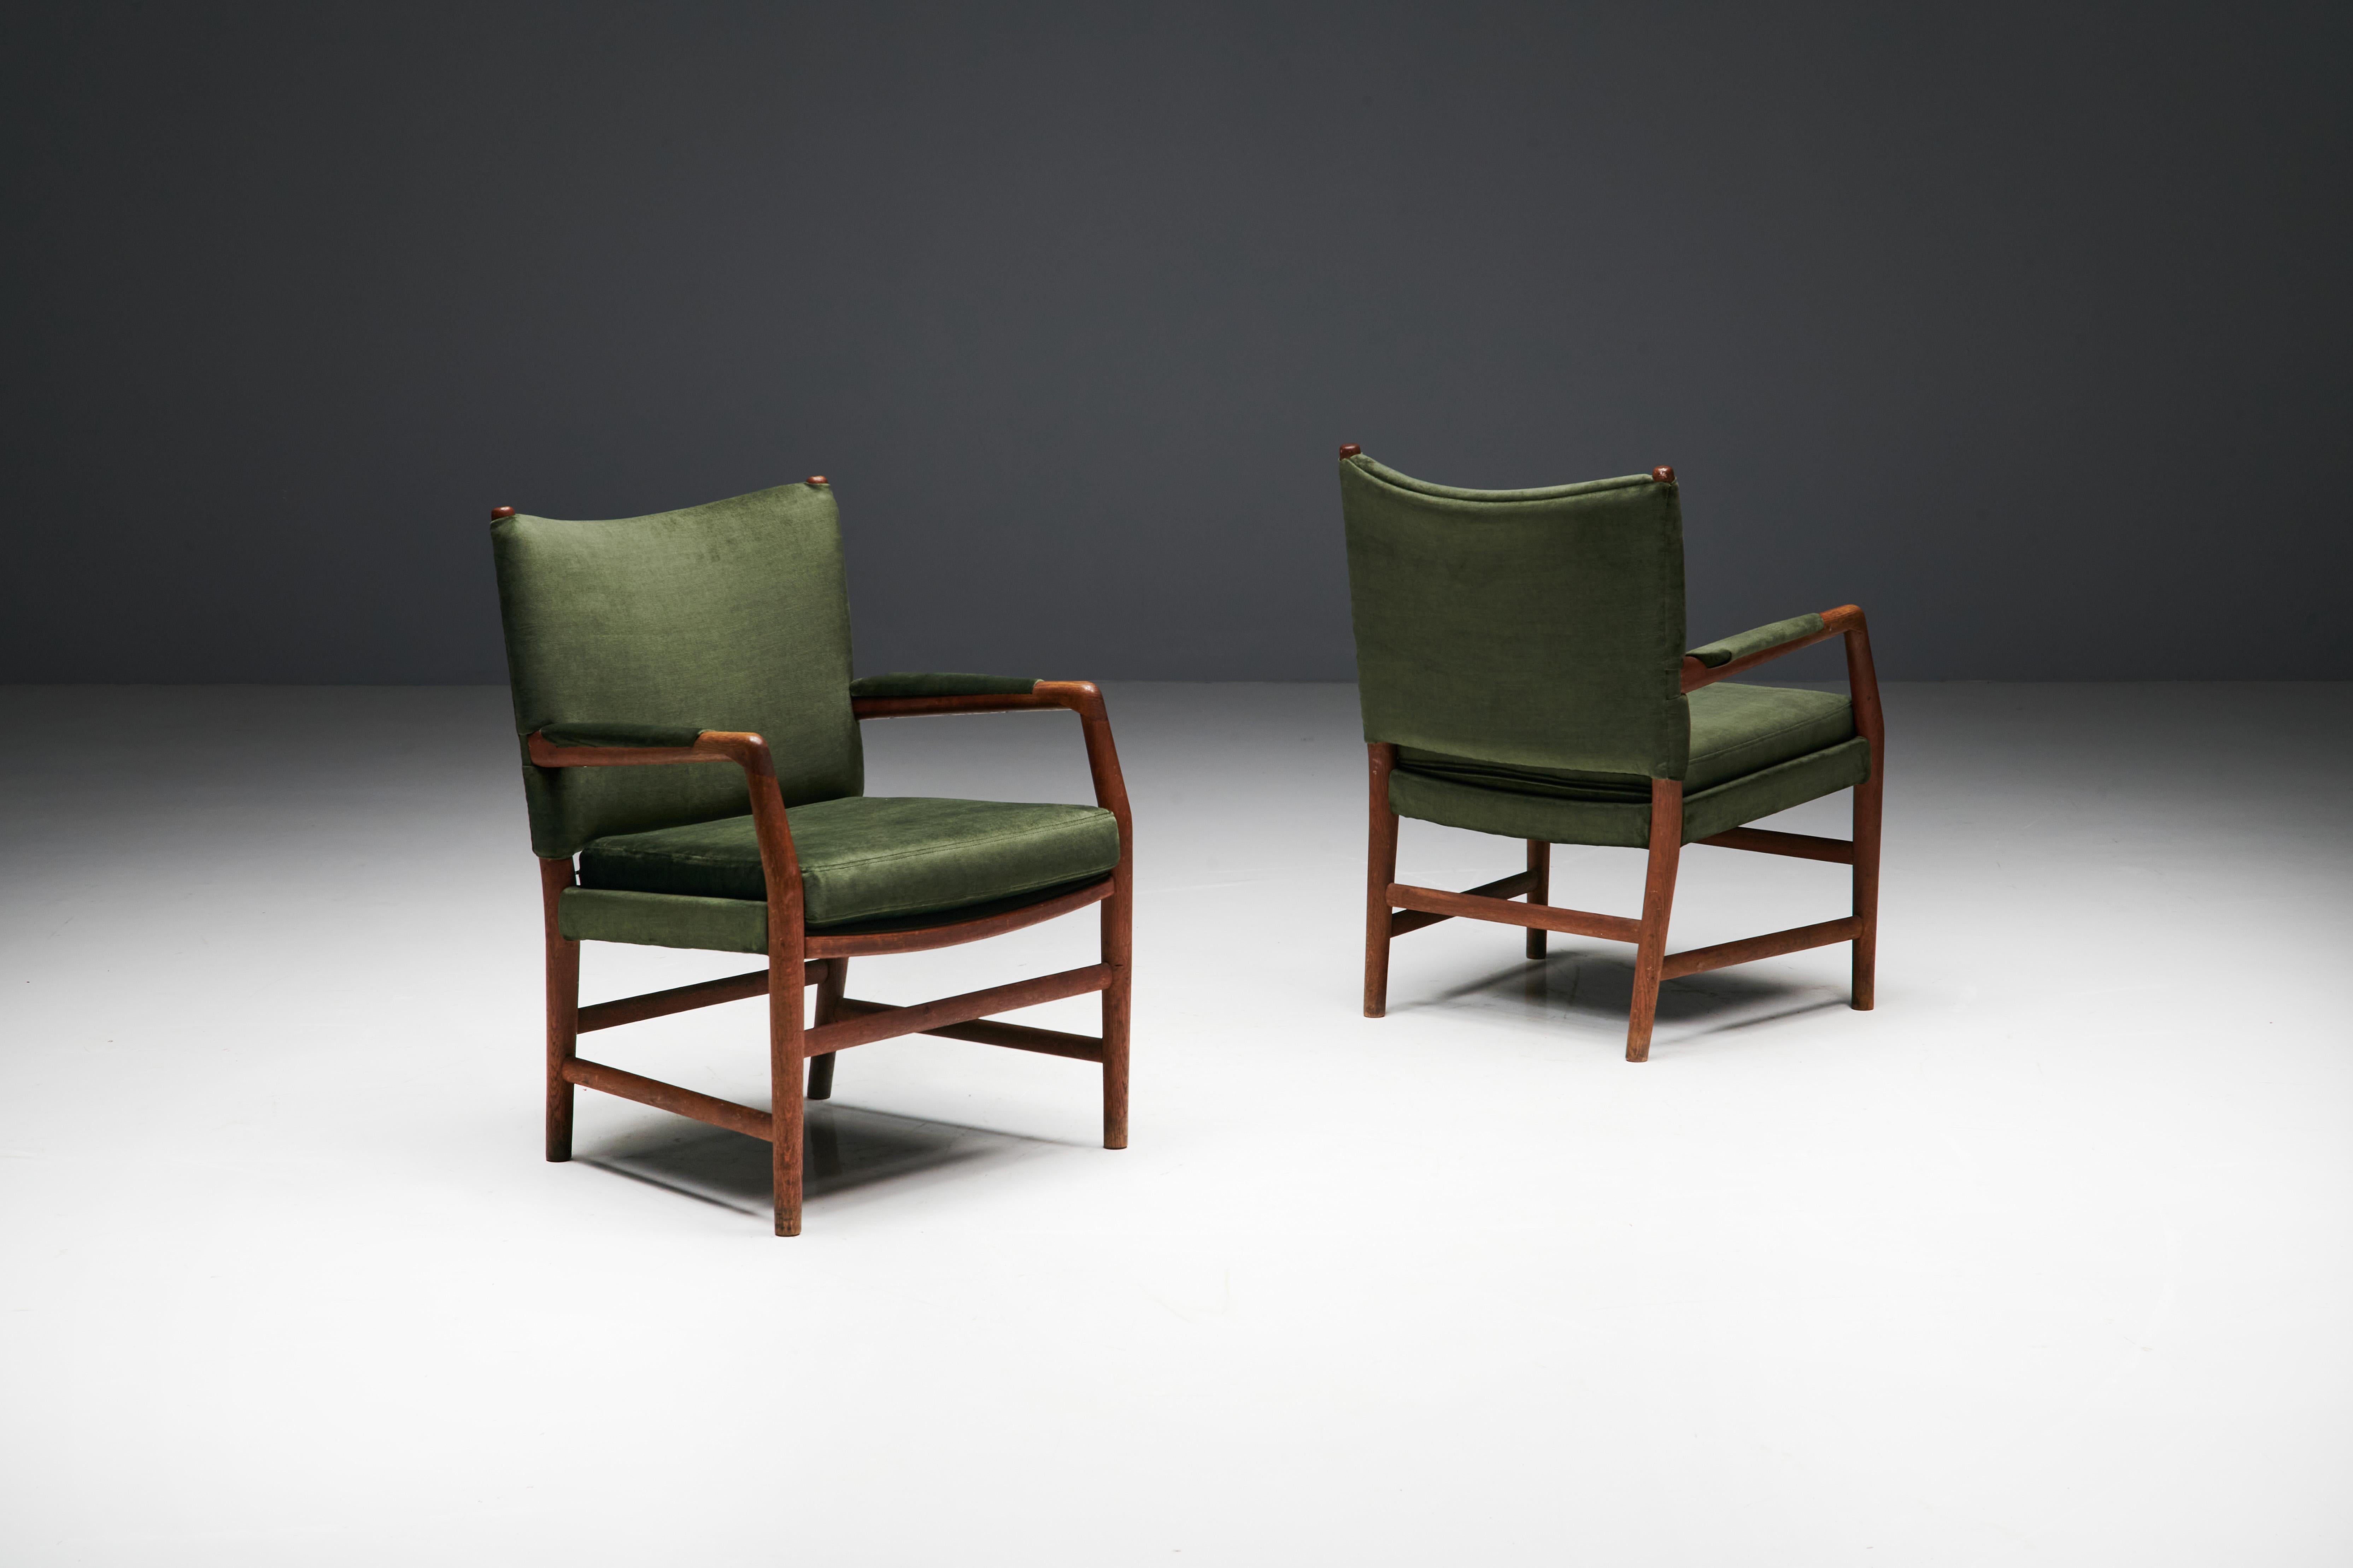 Conference chairs designed by Hans J. Wegner in 1942 for Plan Møbler, Denmark. These distinguished pieces, born from Wegner's creative genius, were originally designed for the Aarhus City Hall, a testament to their regal heritage. Each armchair